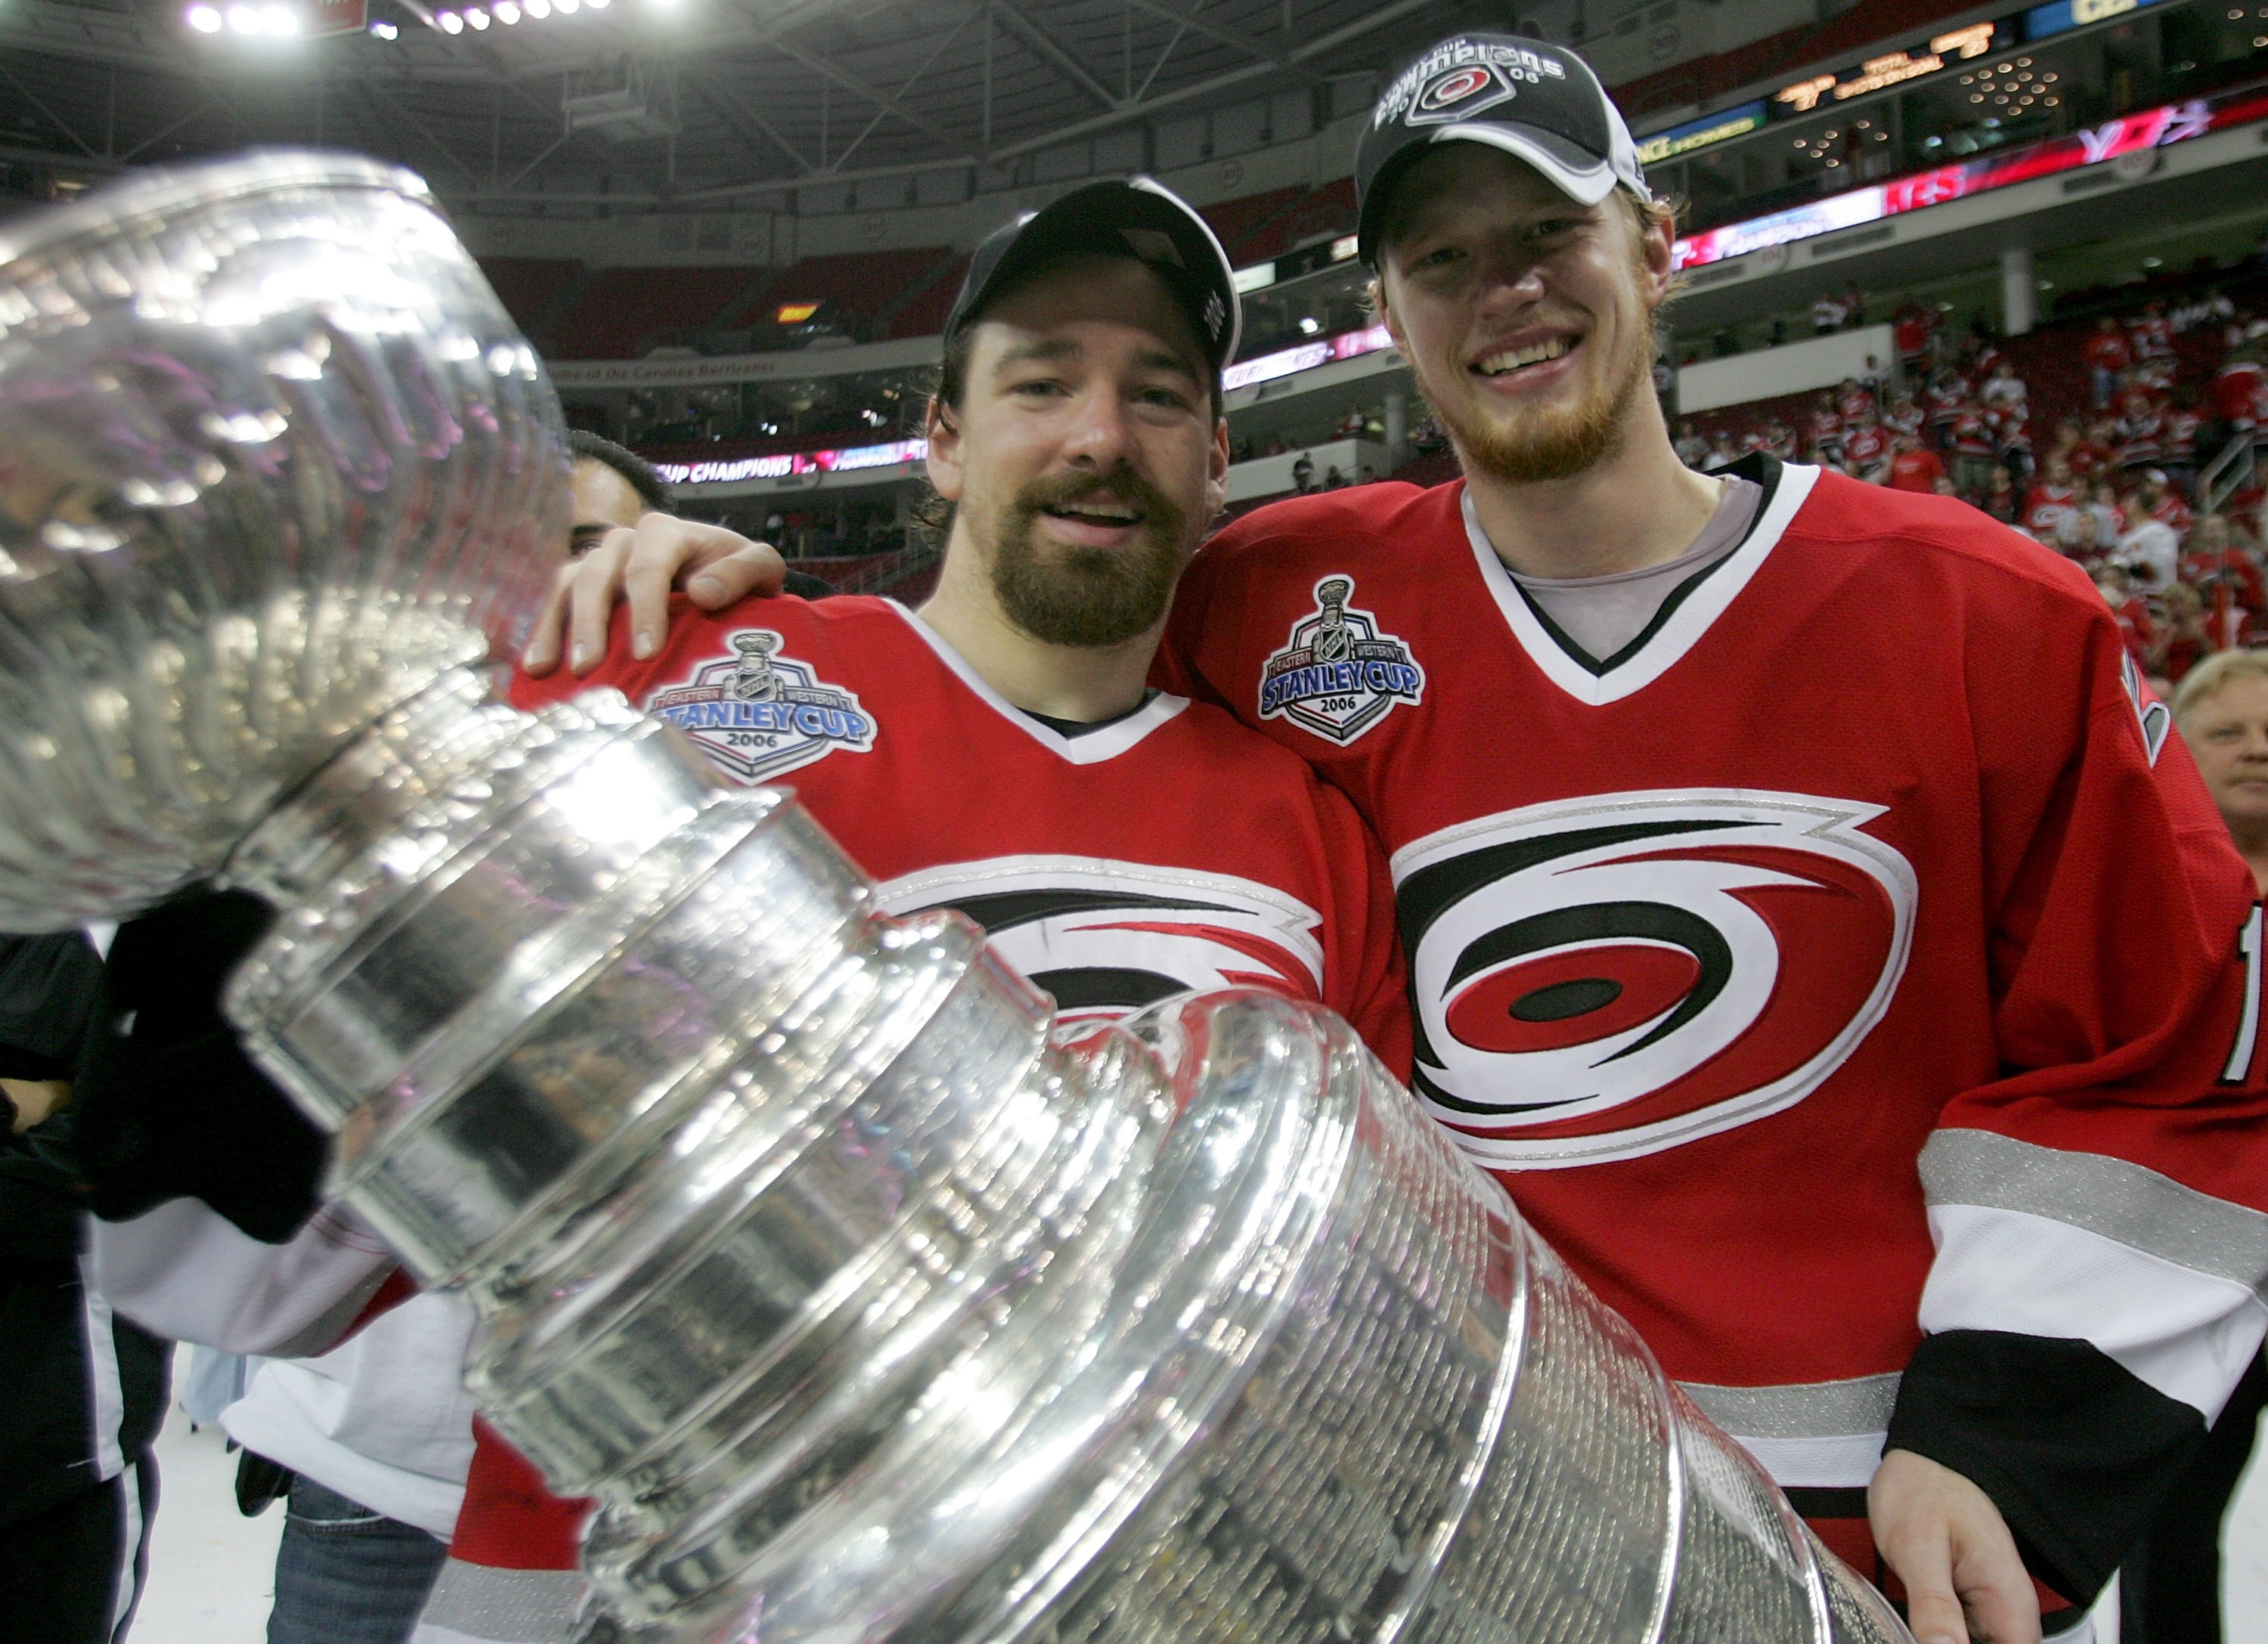 RALEIGH, NC - JUNE 19:  Justin Williams #11 and Eric Staal #12 of the Carolina Hurricanes celebrate with the Stanley Cup after defeating the Edmonton Oilers in game seven of the 2006 NHL Stanley Cup Finals on June 19, 2006 at the RBC Center in Raleigh, No